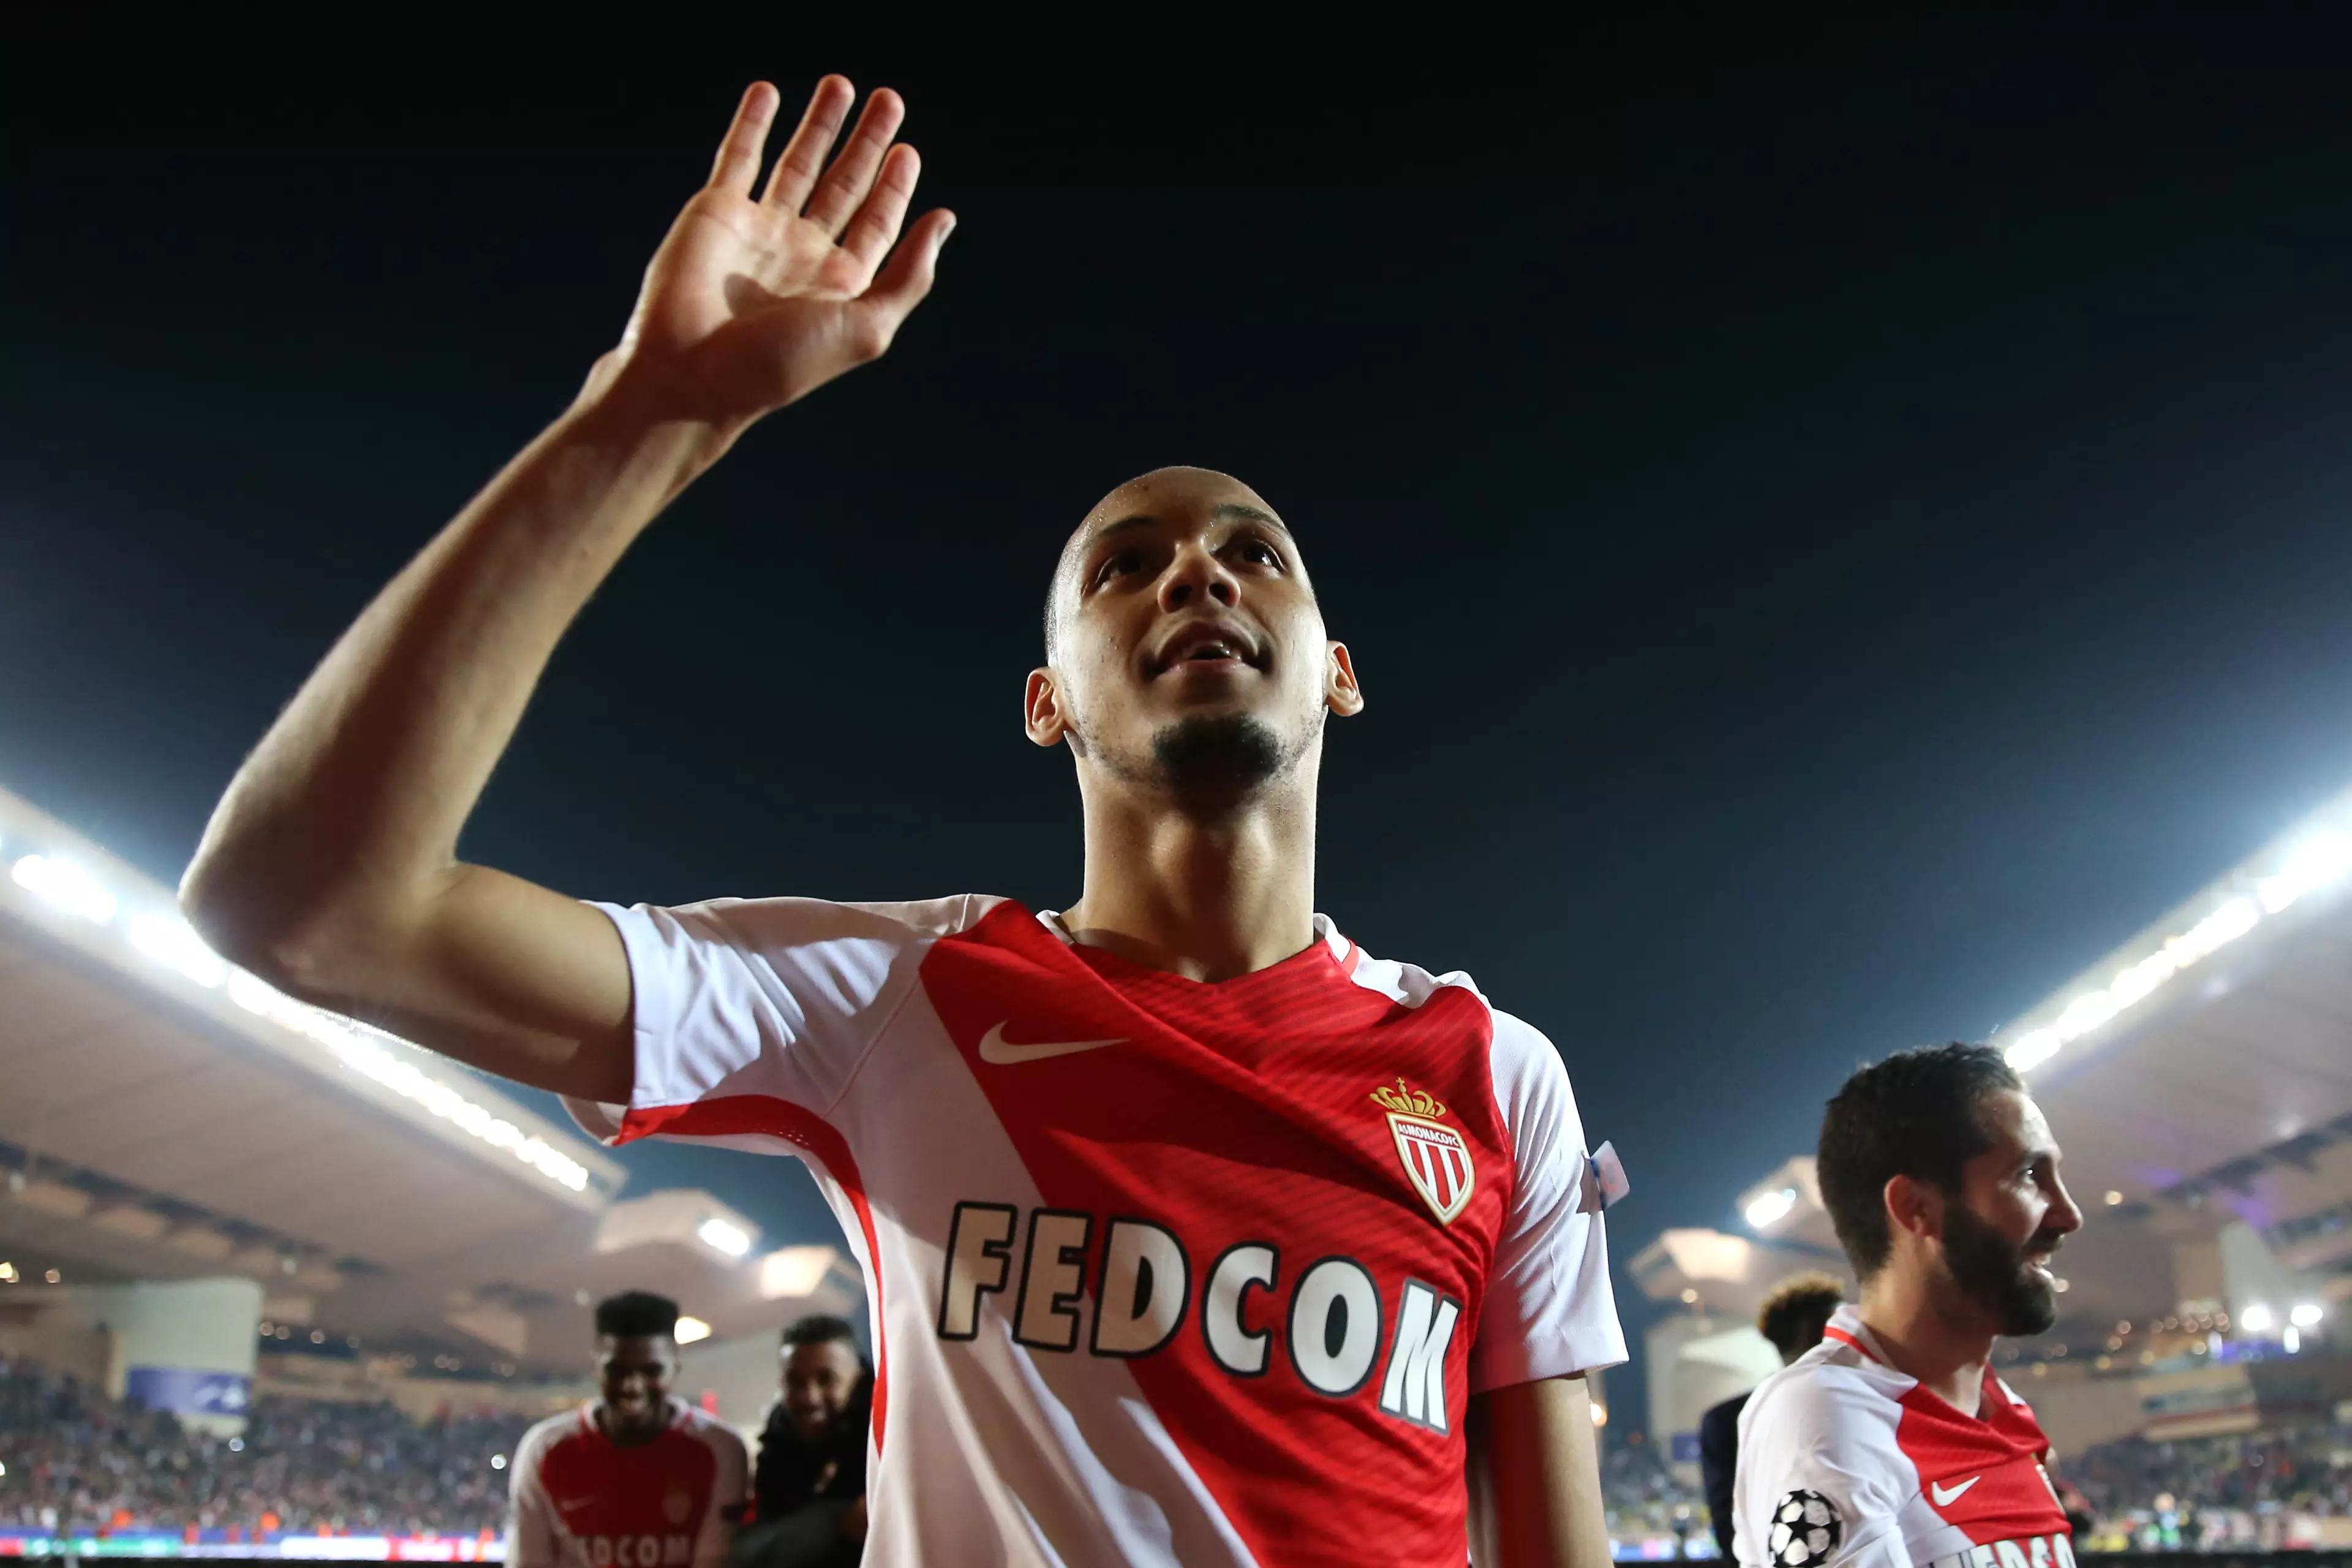 Fabinho will also play for Liverpool next season. Image: PA Images